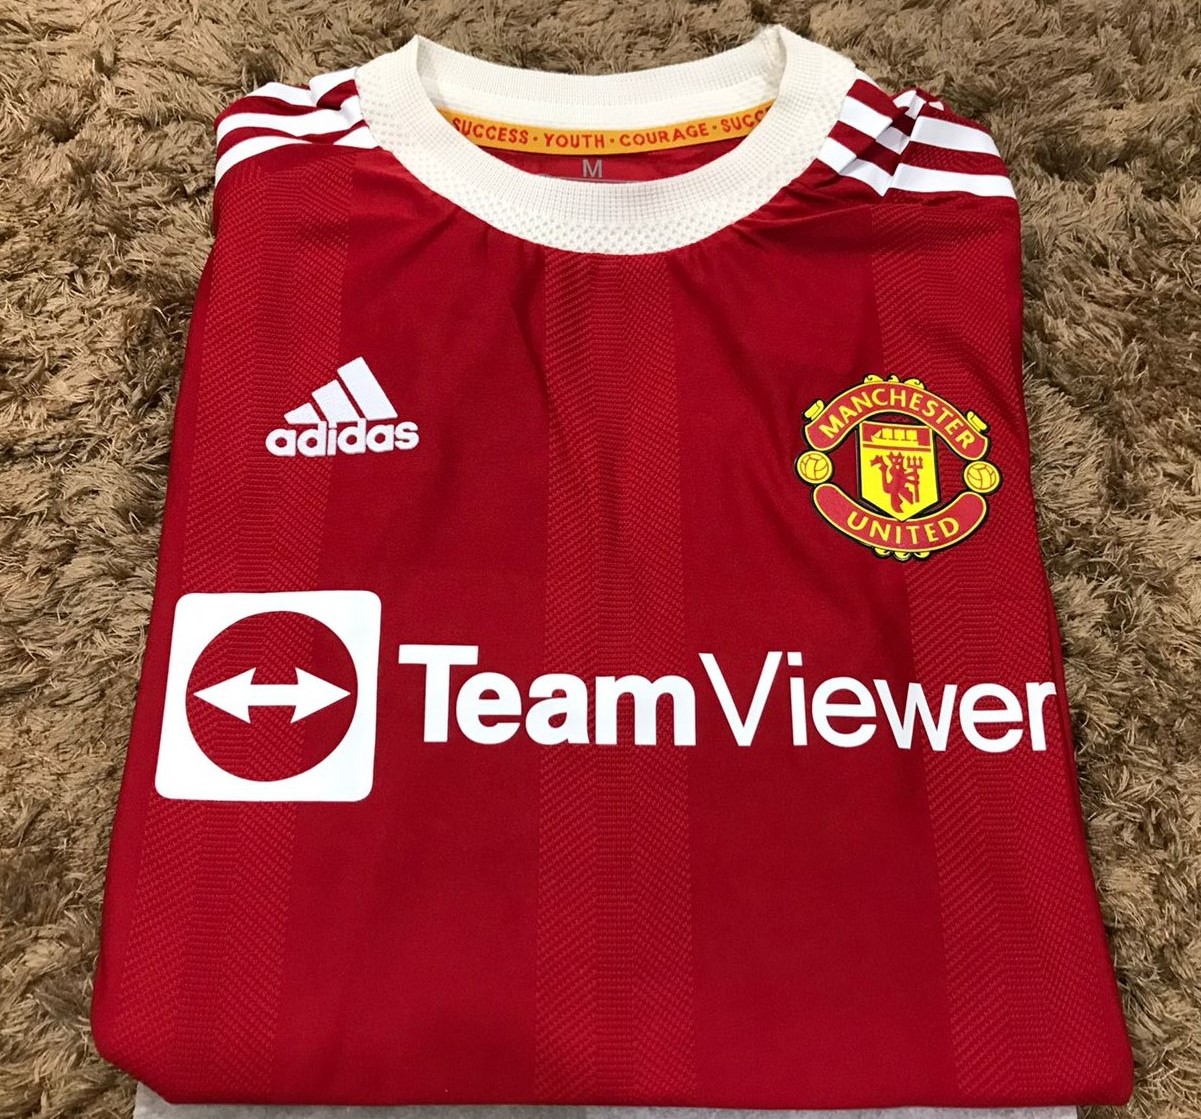 man united jersey player edition